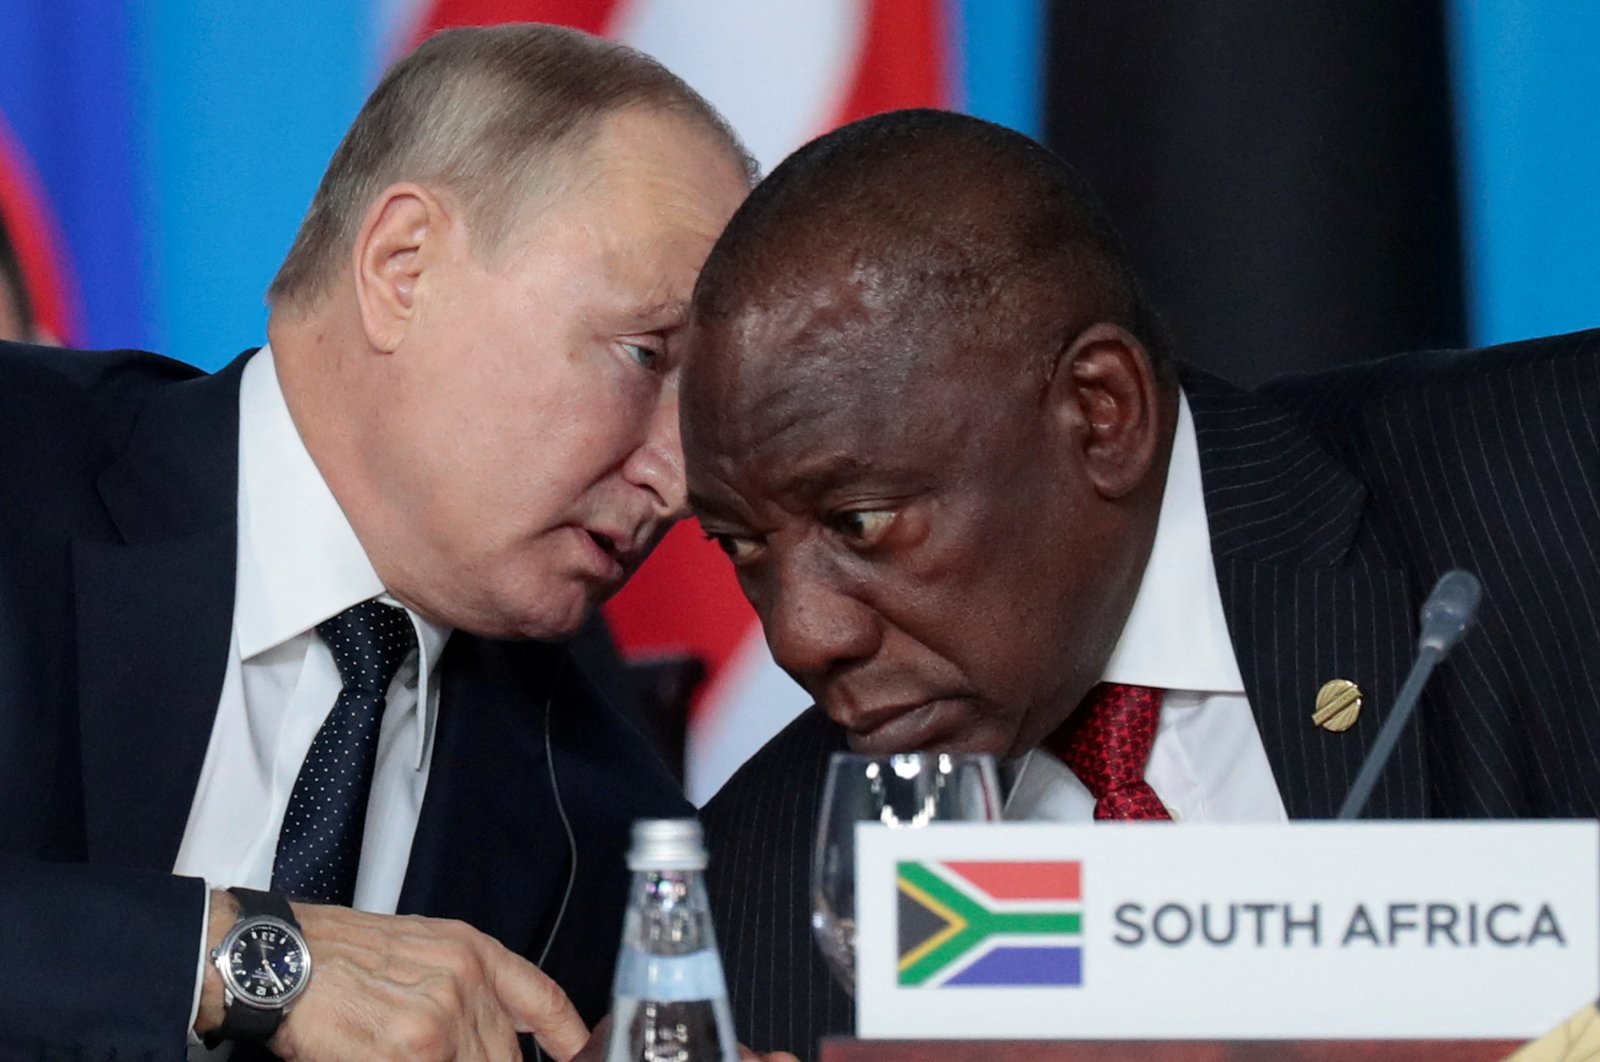 Russia&#039;s President Vladimir Putin (L) speaks with South African President Cyril Ramaphosa (R) at the first plenary session as part of the 2019 Russia-Africa Summit at the Sirius Park of Science and Art in Sochi, Russia, Oct. 24, 2019. (Reuters Photo)